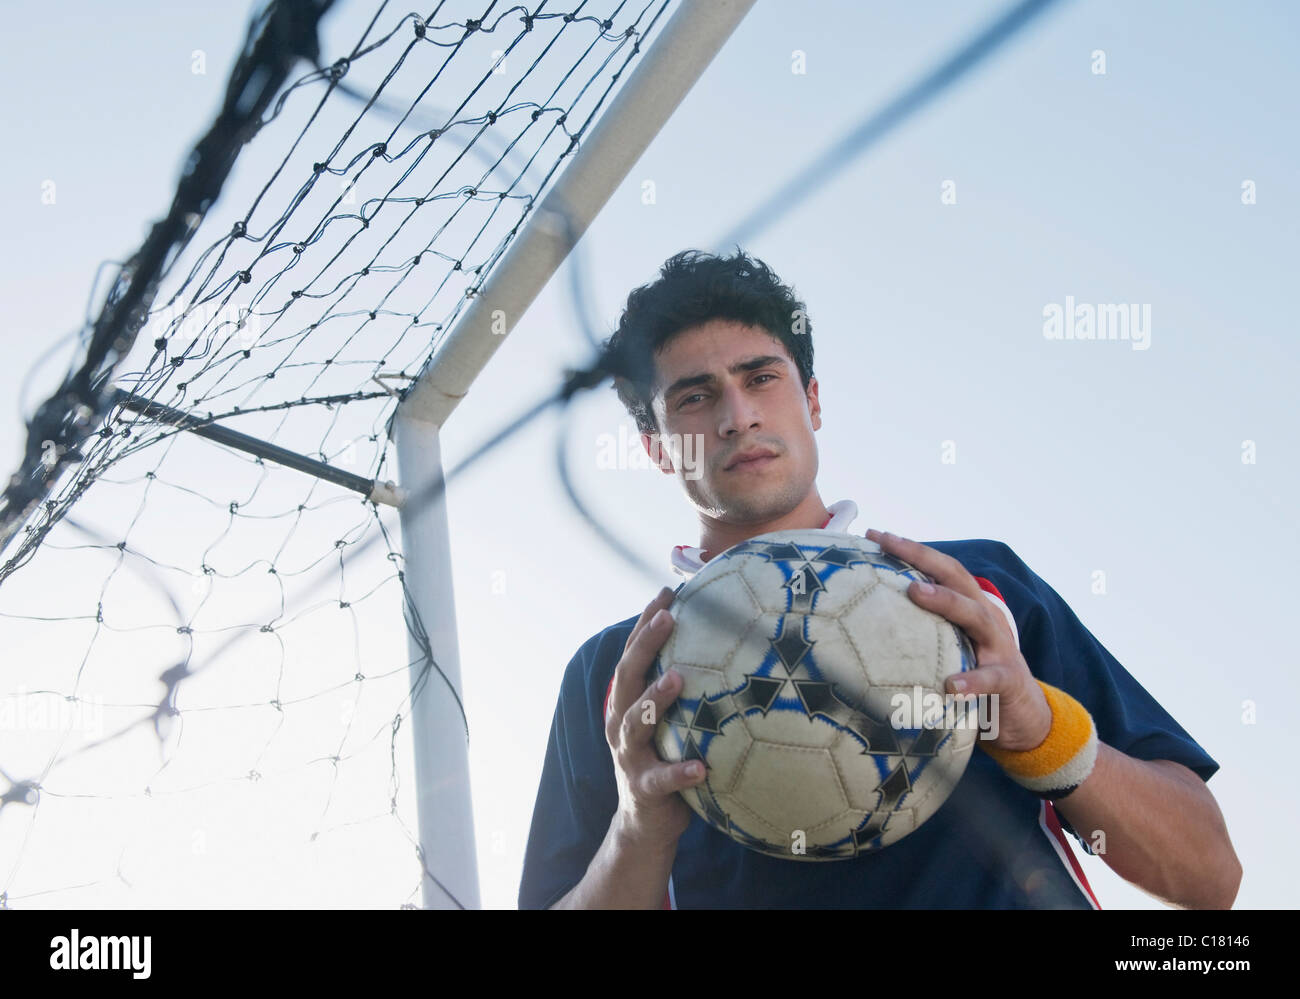 Soccer player holding a soccer ball Stock Photo